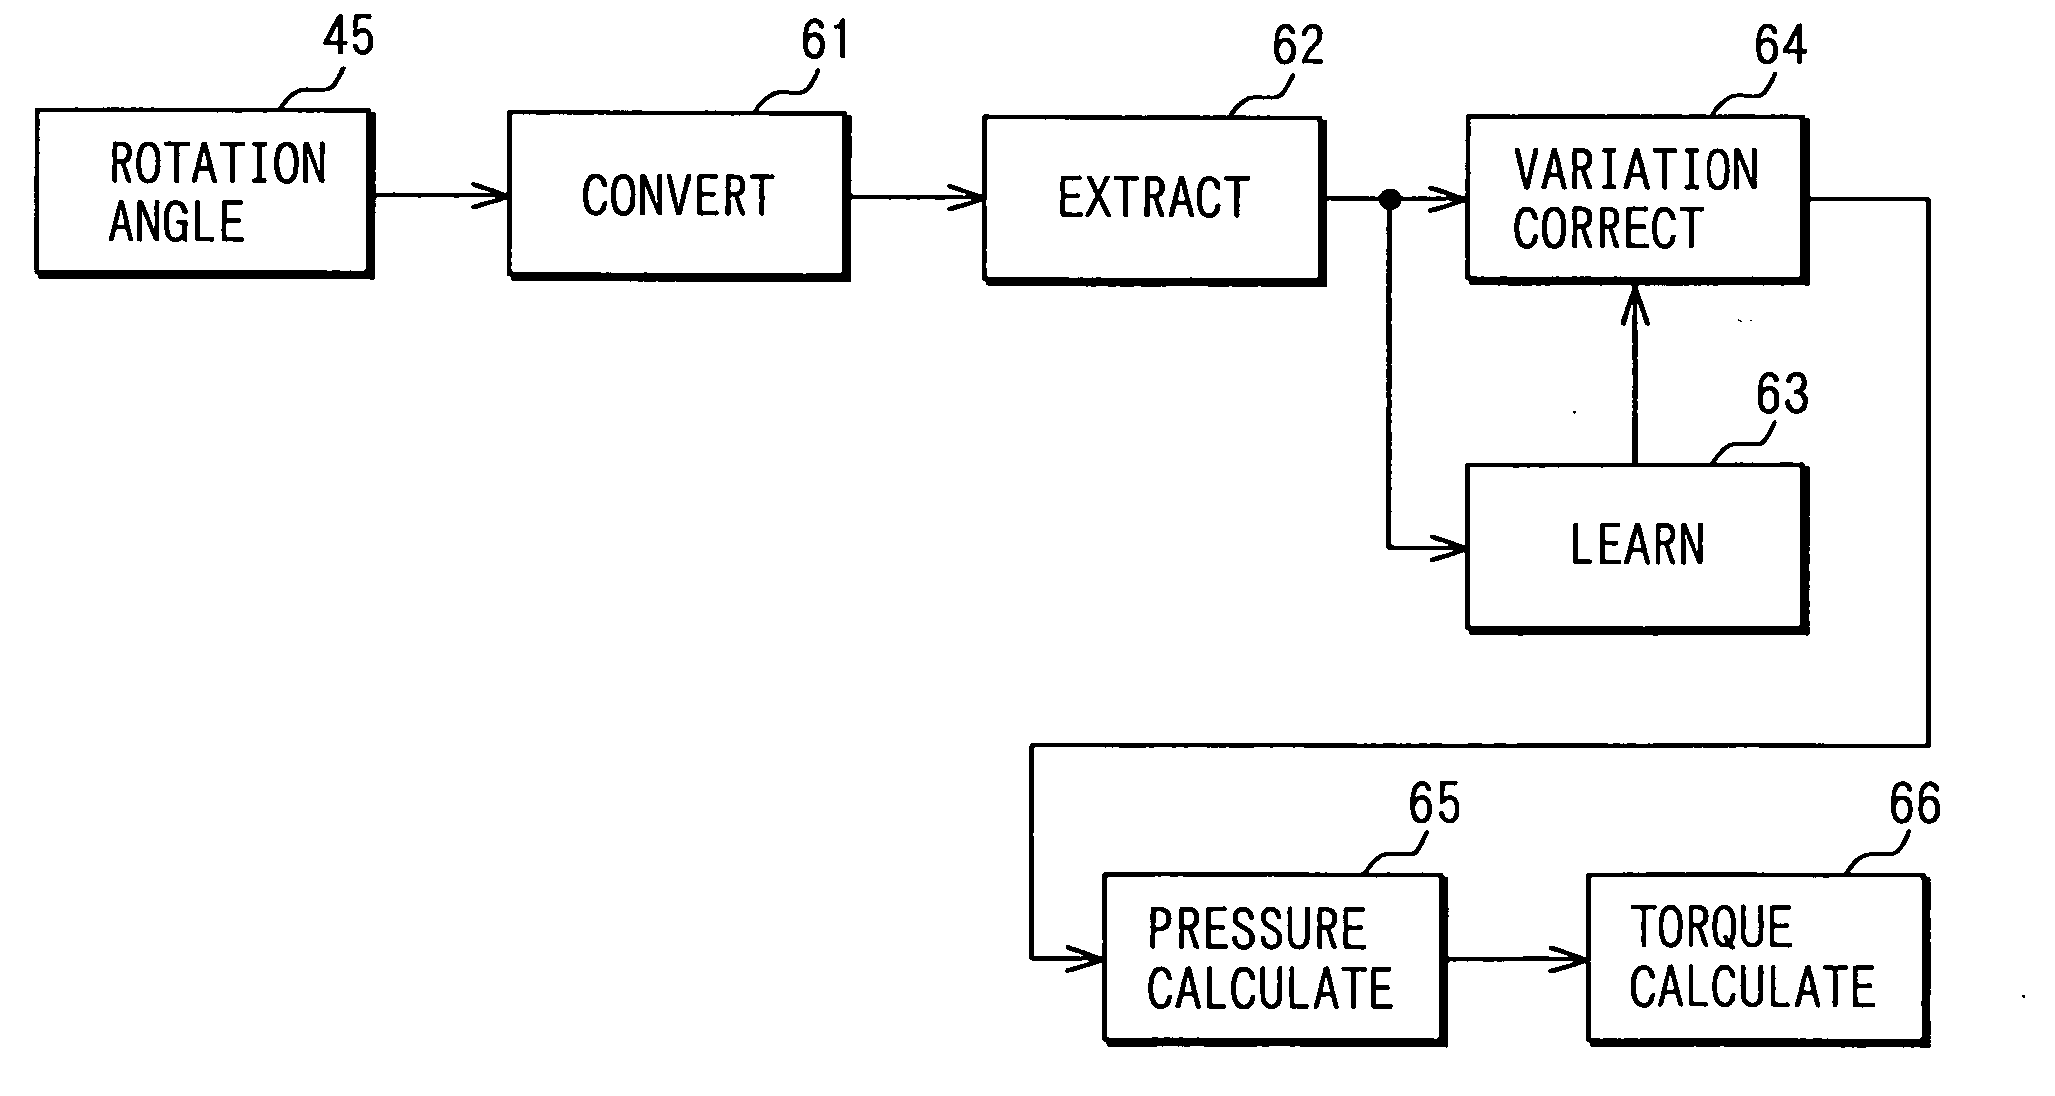 Engine combustion state detection device